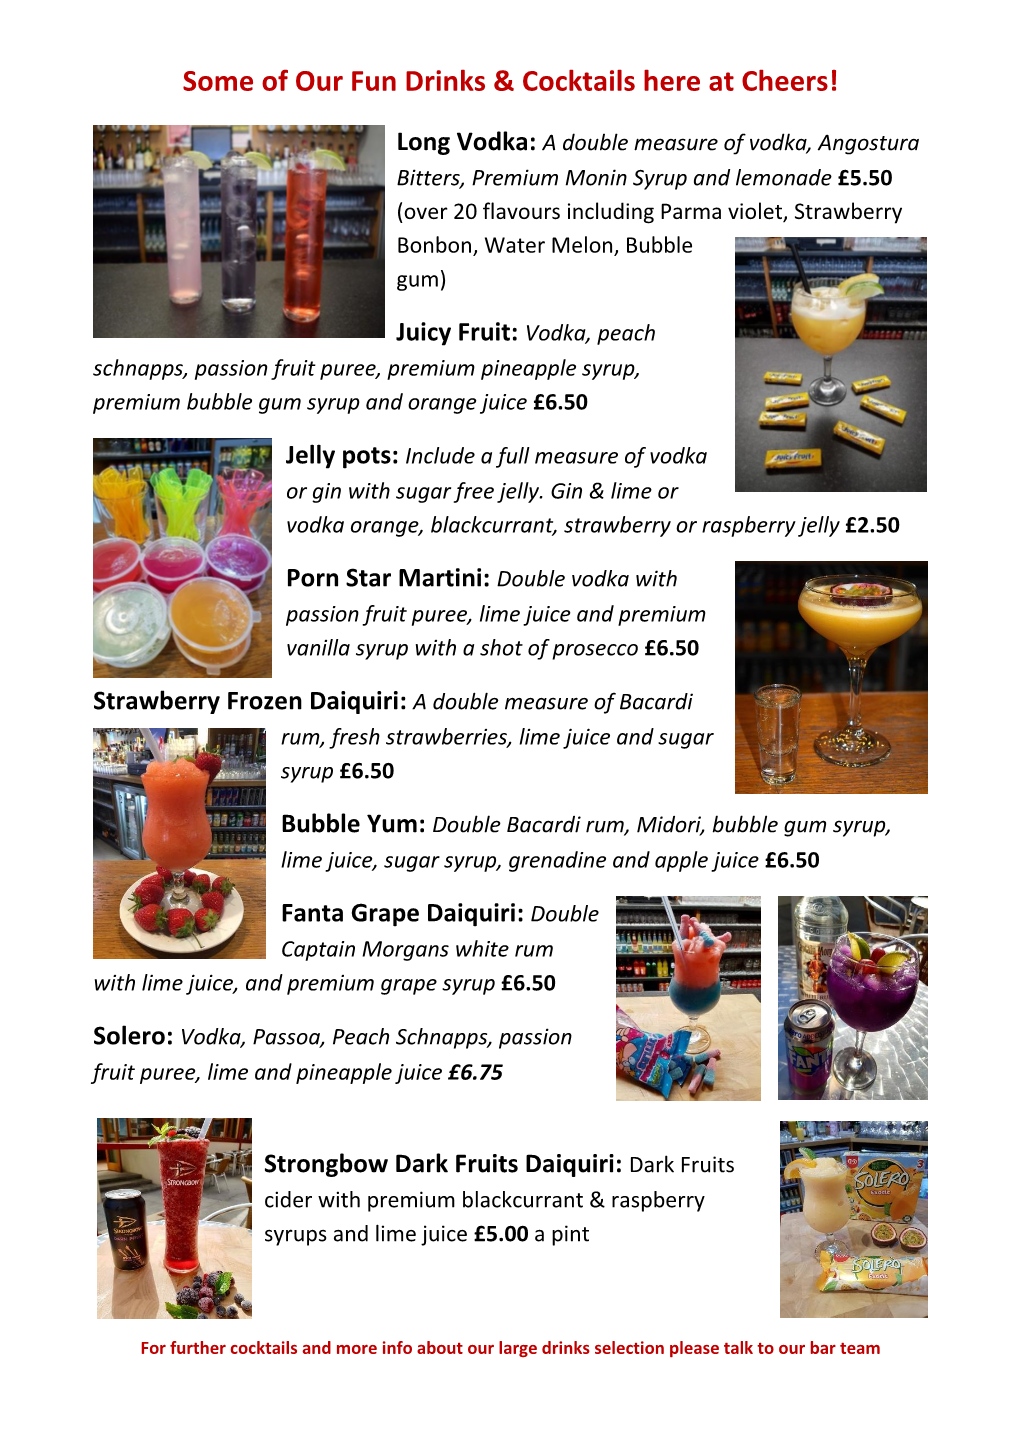 Some of Our Fun Drinks & Cocktails Here at Cheers!